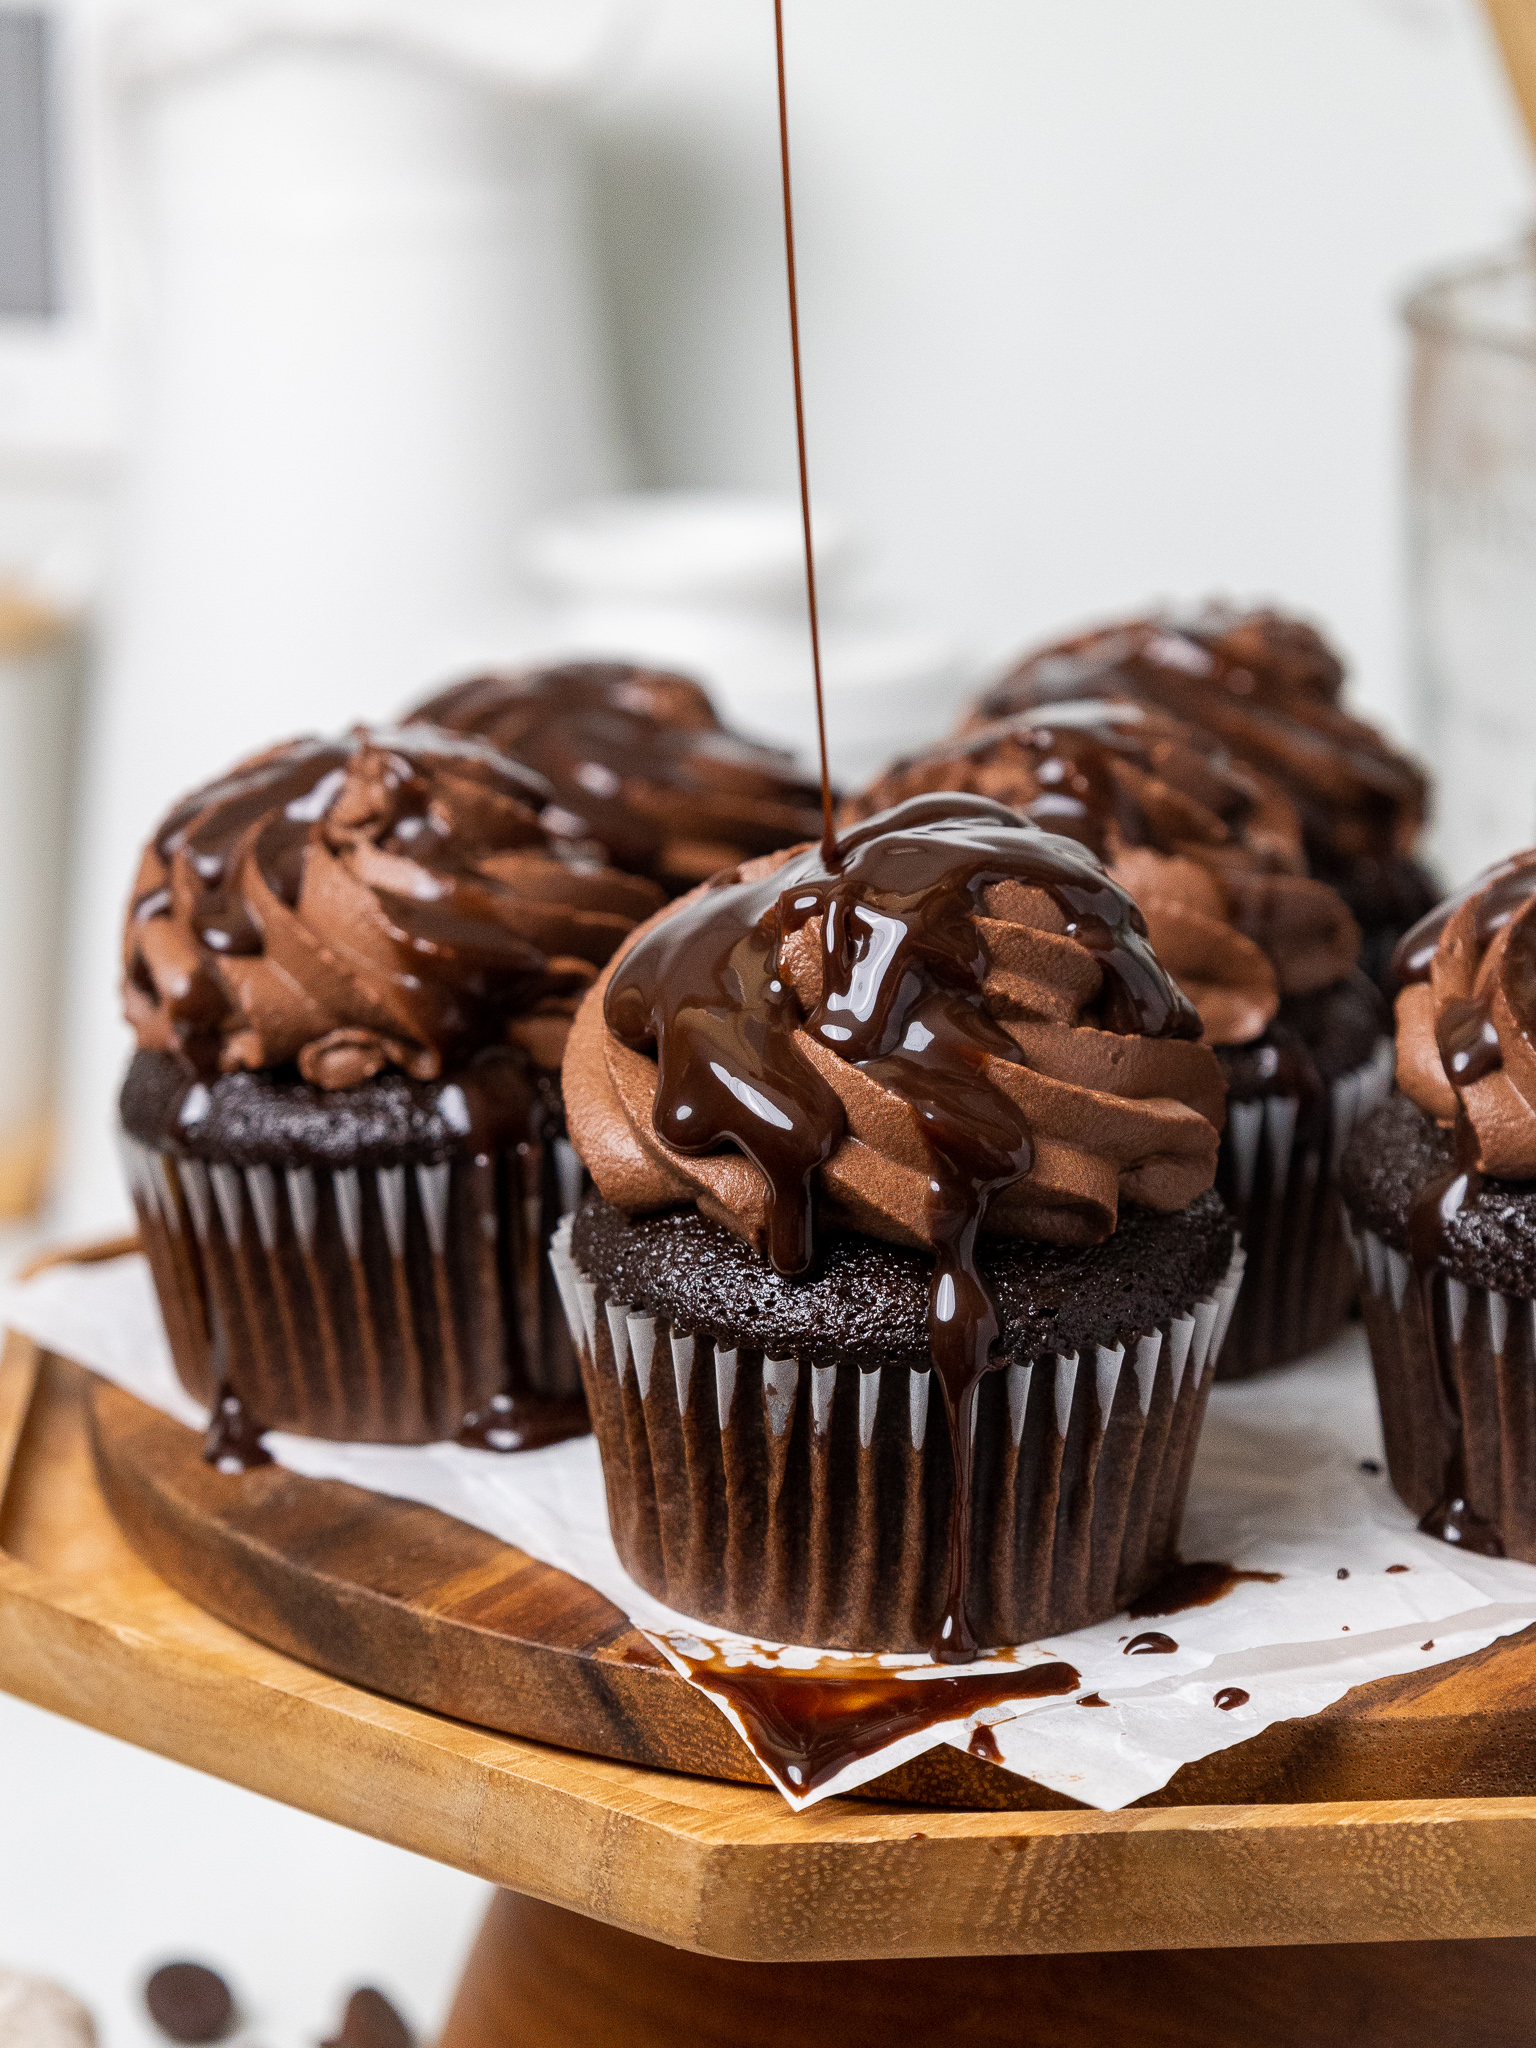 image of chocolate syrup being drizzled over chocolate whipped cream frosting on cupcakes